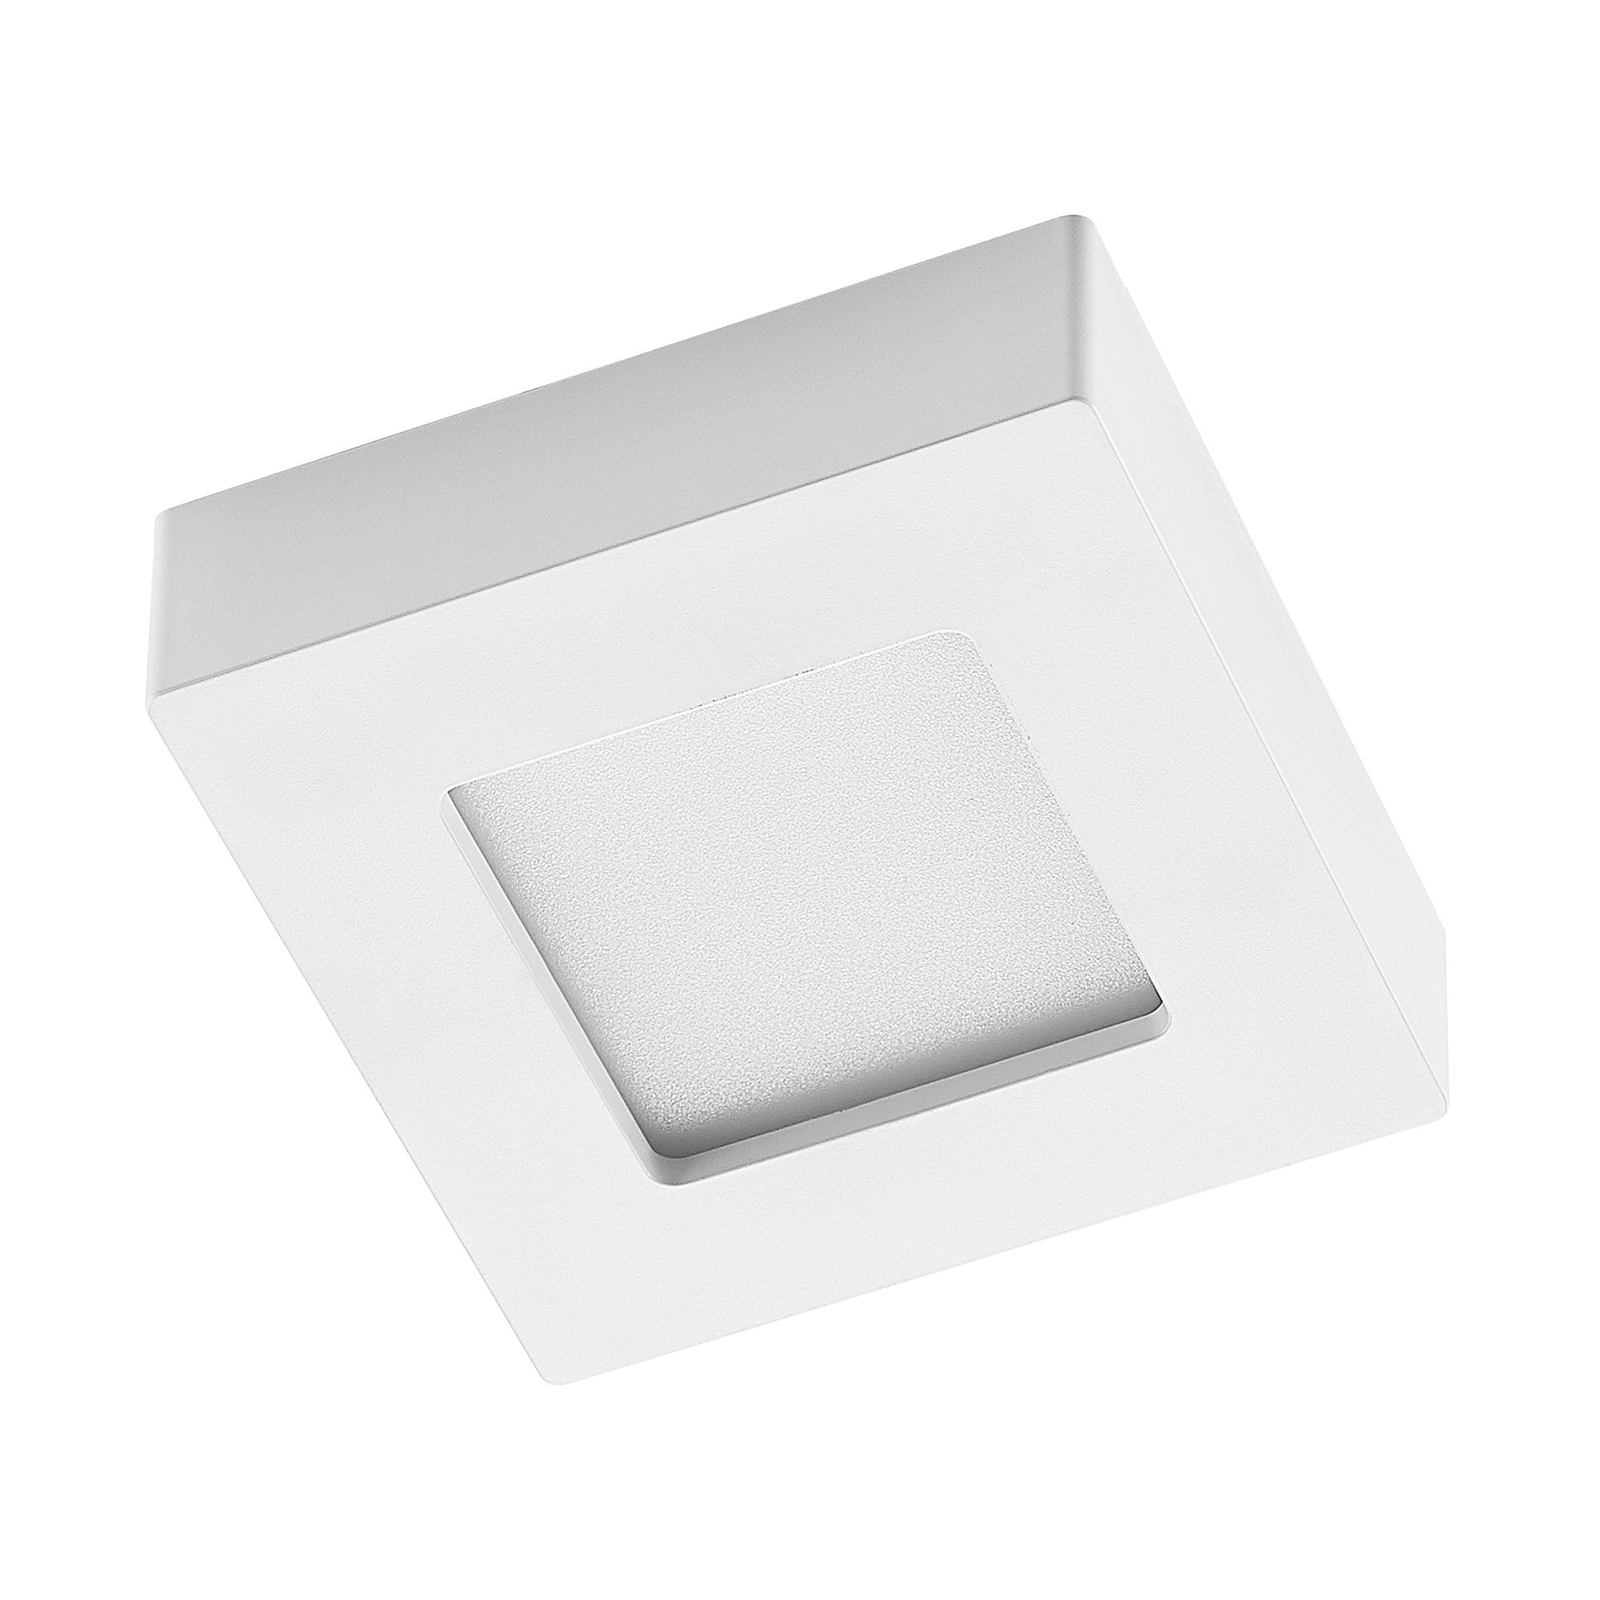 Prios LED ceiling light Alette, white, 12.2 cm, dimmable